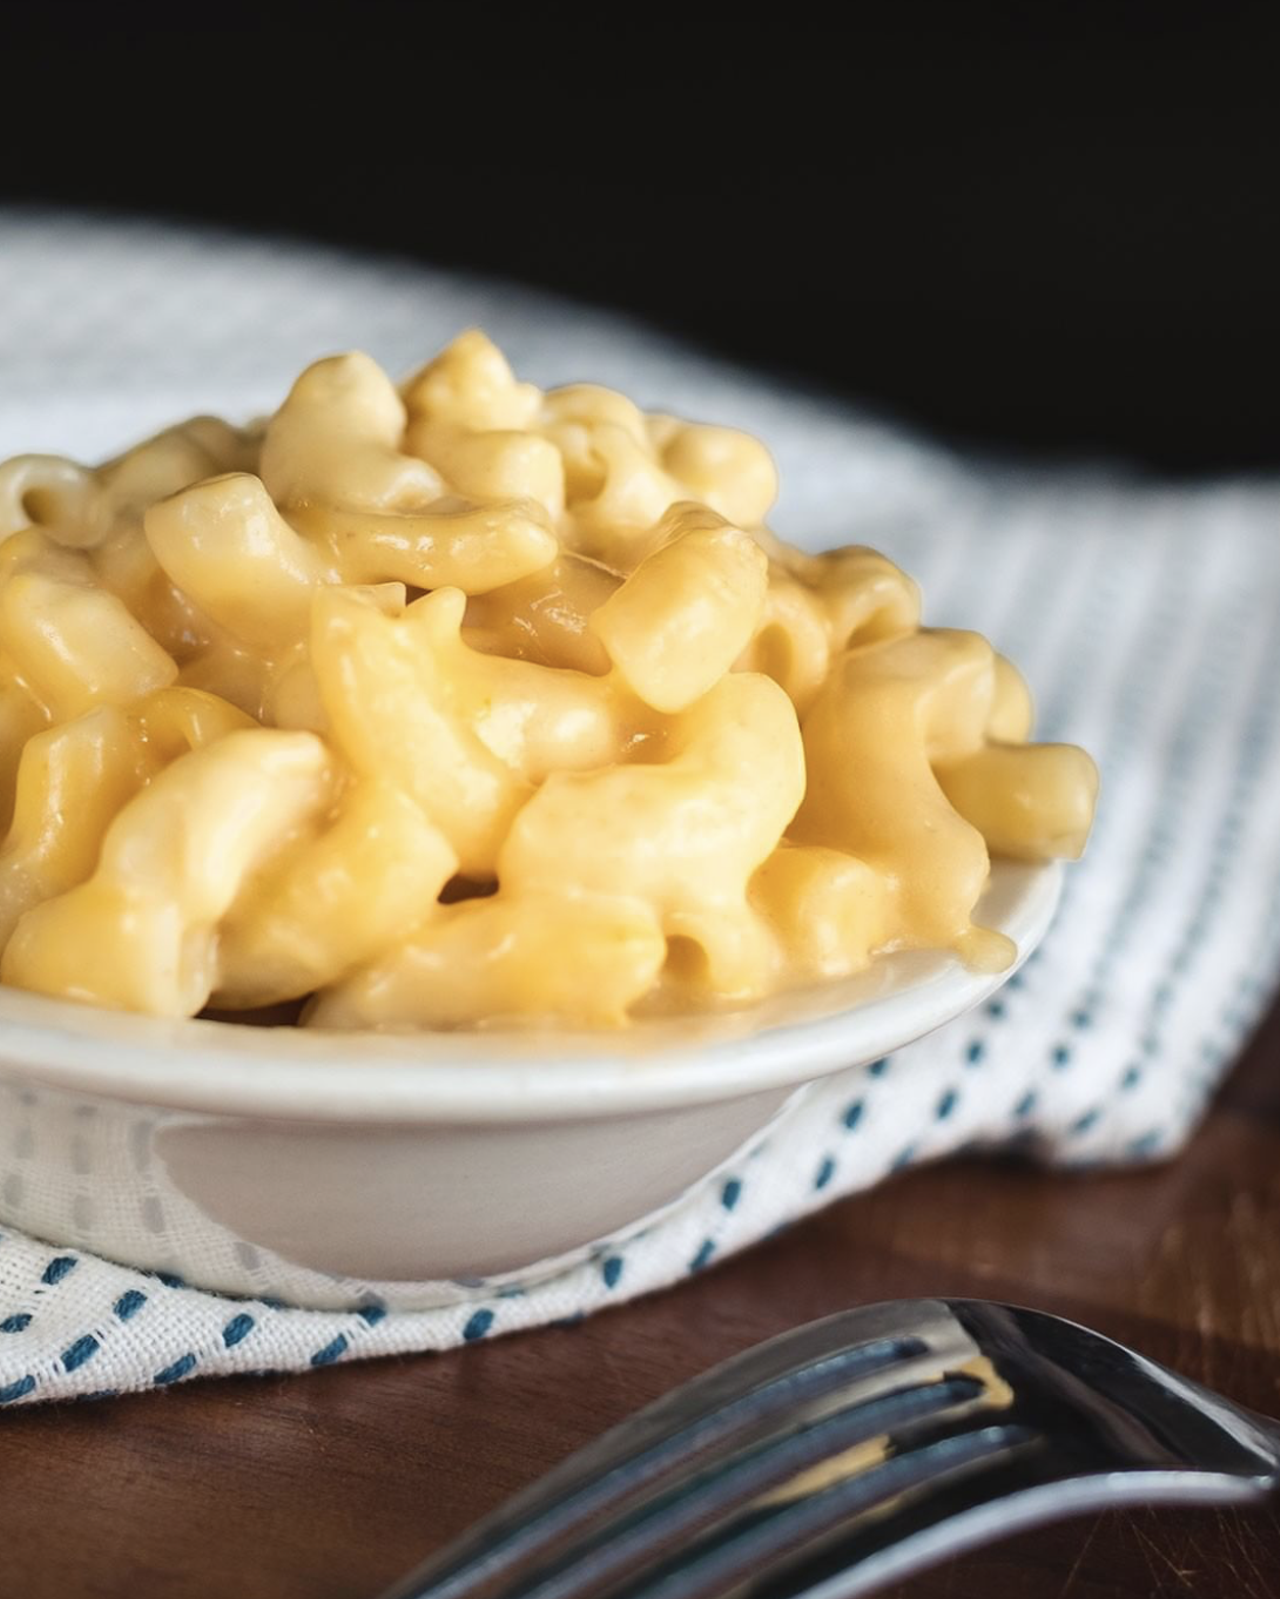 Luby’s Cafeteria Macaroni and Cheese
Another dose of nostalgia, from CopyKat.com — this ooey, gooey mac and cheese is just the ticket.
Find the recipe here.
Photo via Instagram /  lubys